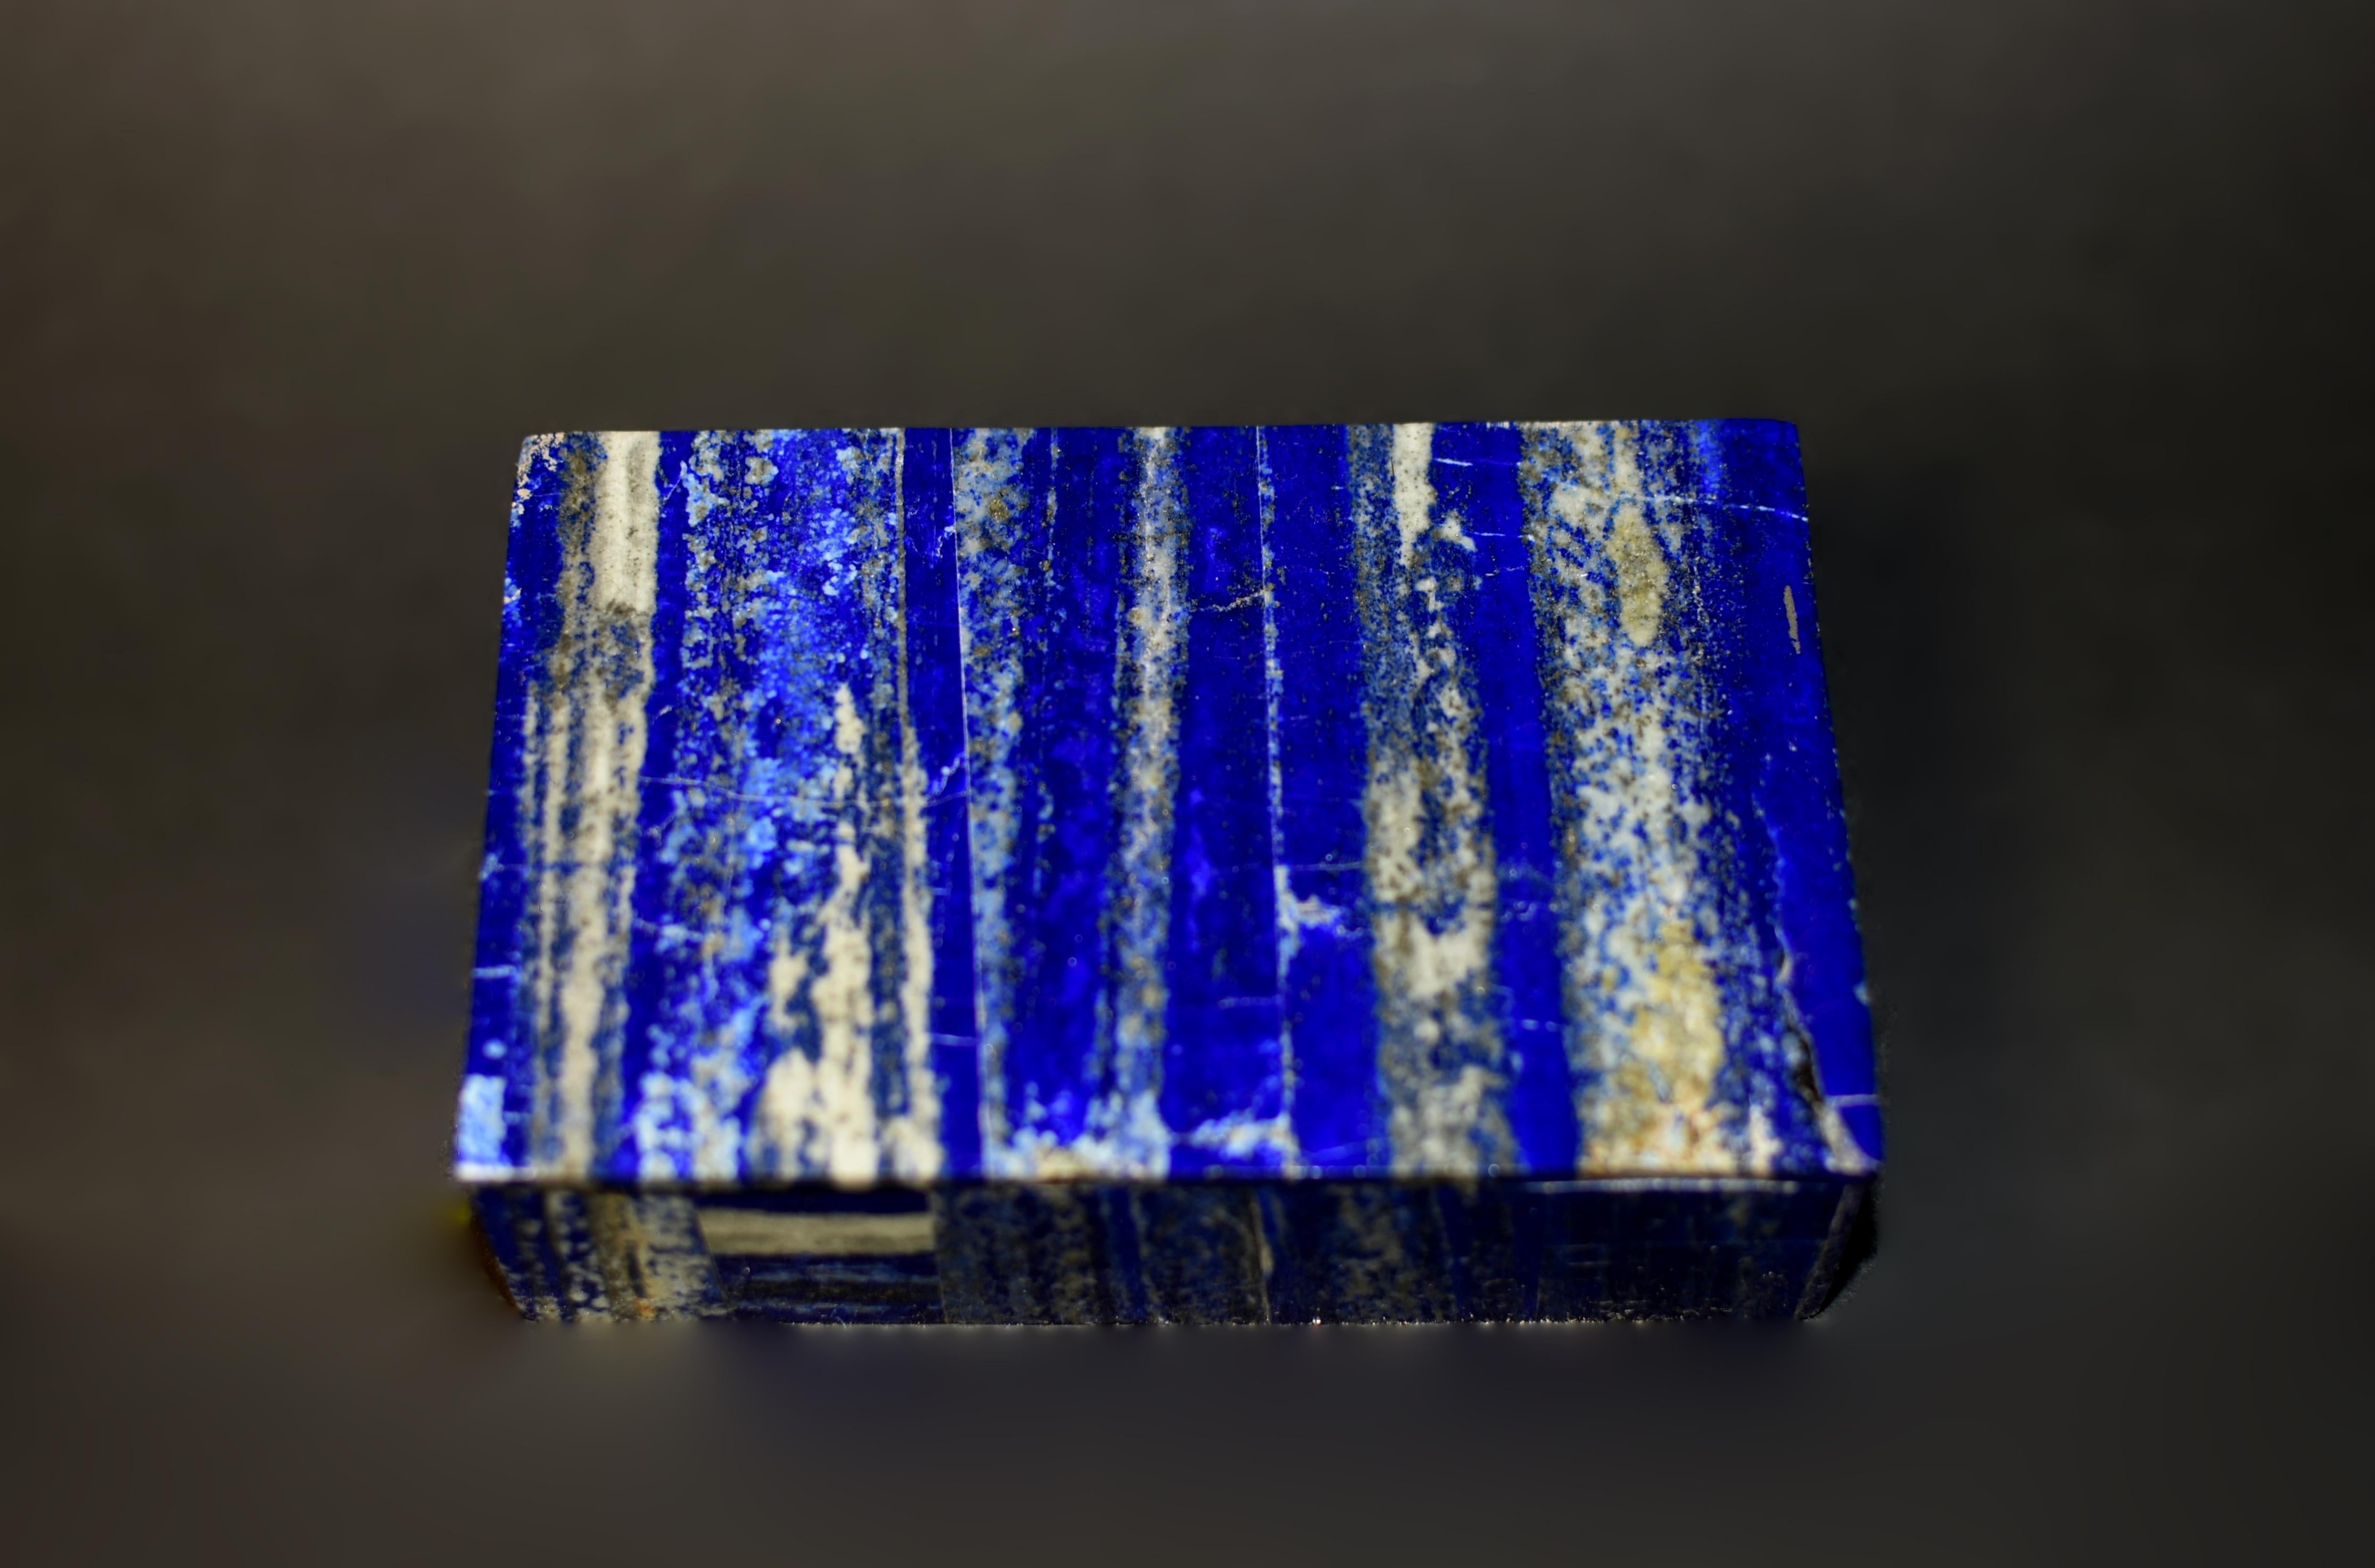 A beautiful vintage natural lapis box. Crafted from the finest grade AAA natural lapis lazuli, the box uses carefully selected pieces resembling a forest of trees against blue skies. Saturated cobalt blue with splendid gold sparkles. Interior with